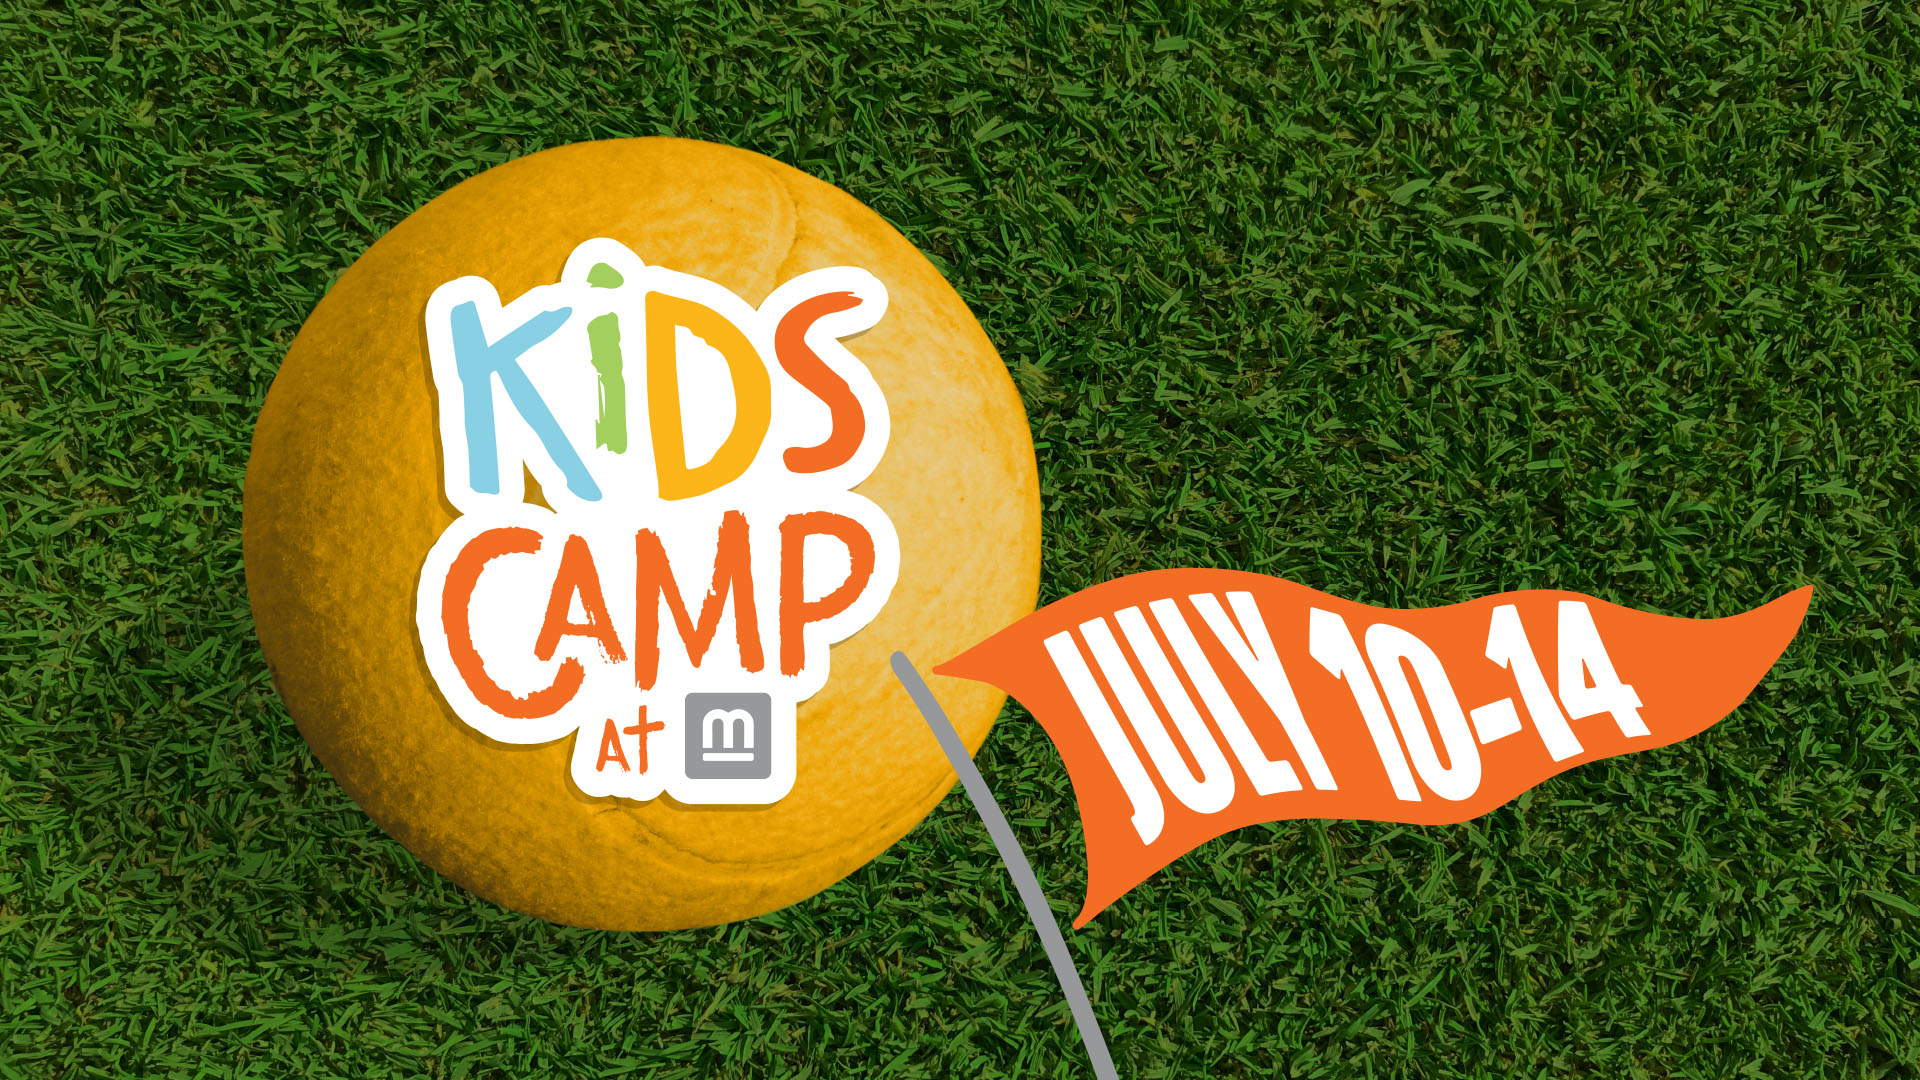 A Kids Camp, by Kanakuk, at Mission City Church in San Antonio